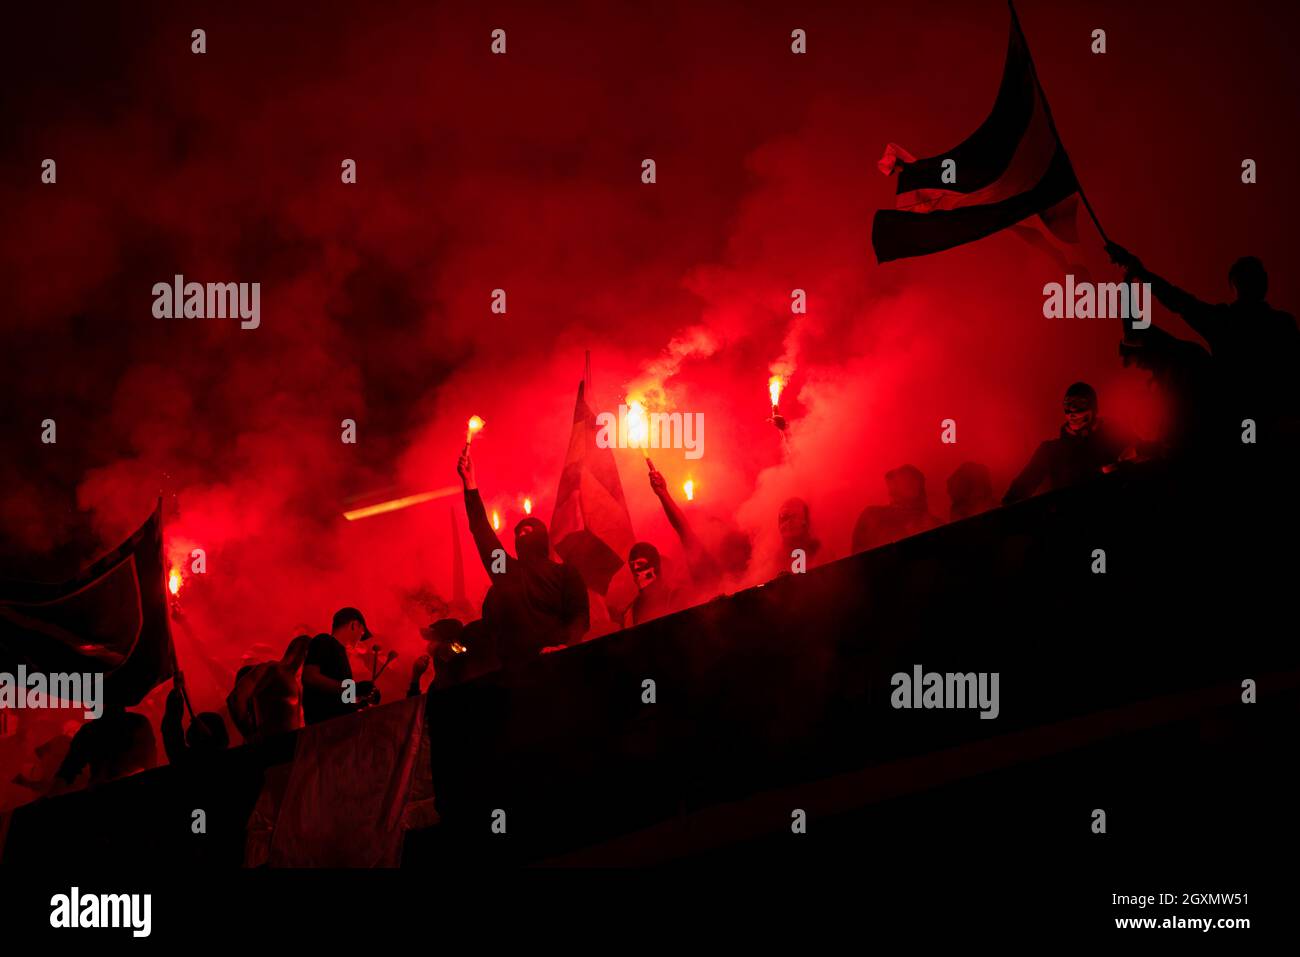 football hooligans with mask holding torches in fire while supporting their favorite team during a match at stadium Stock Photo